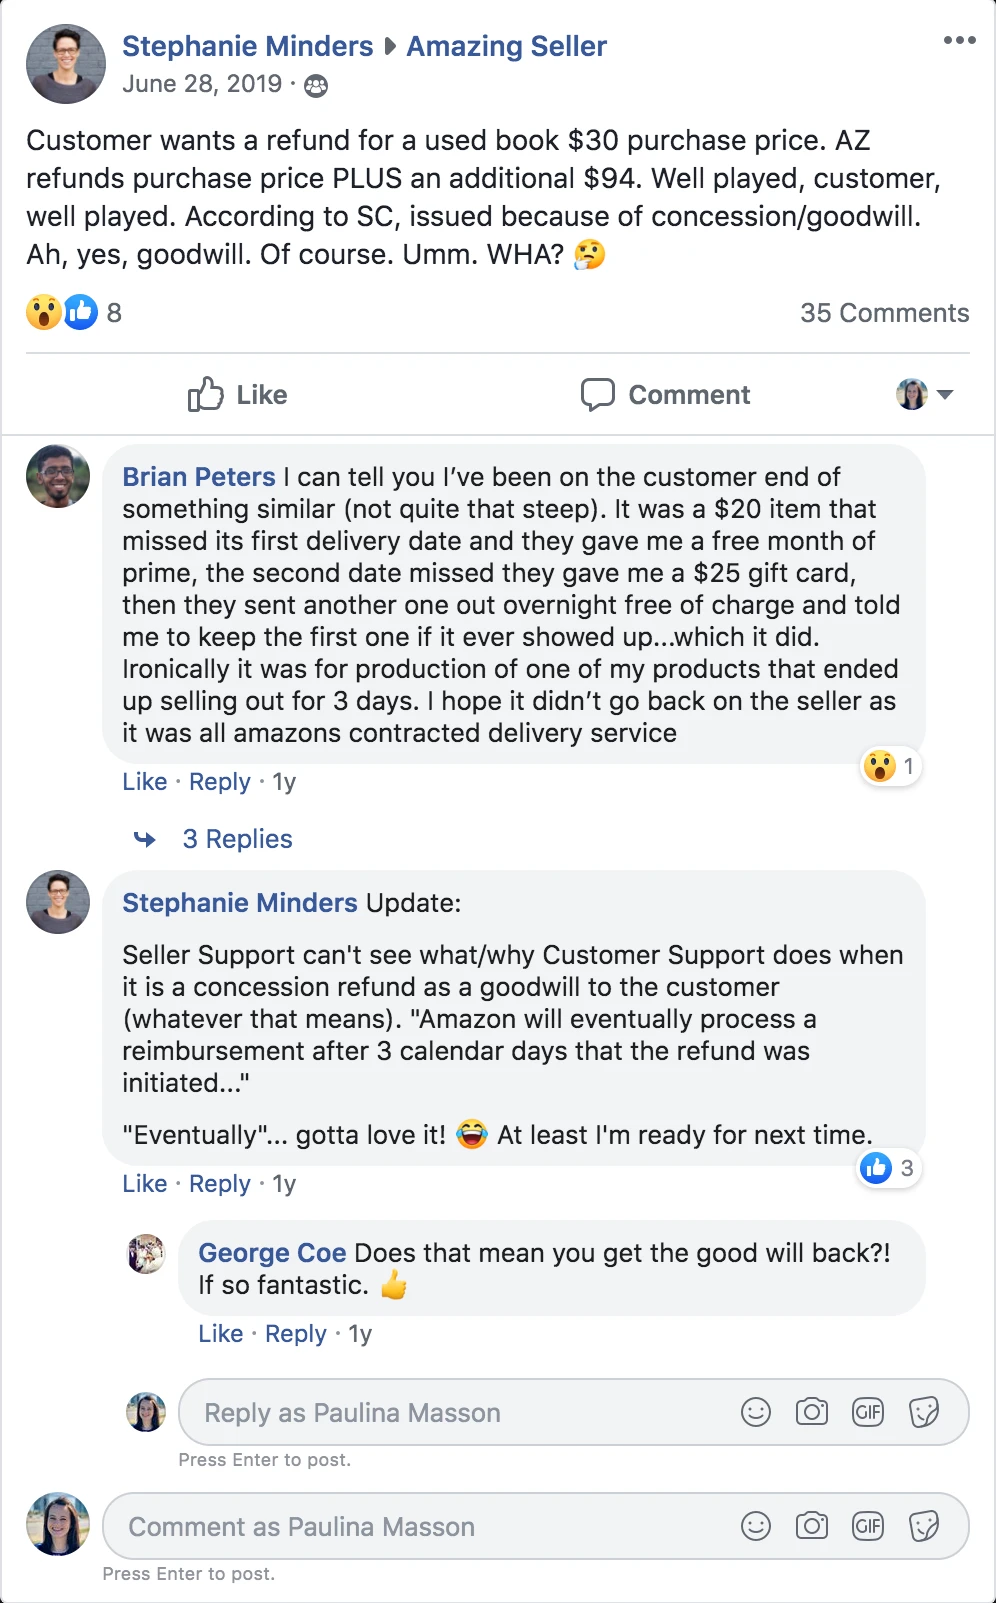 People discussing goodwill refund on Facebook